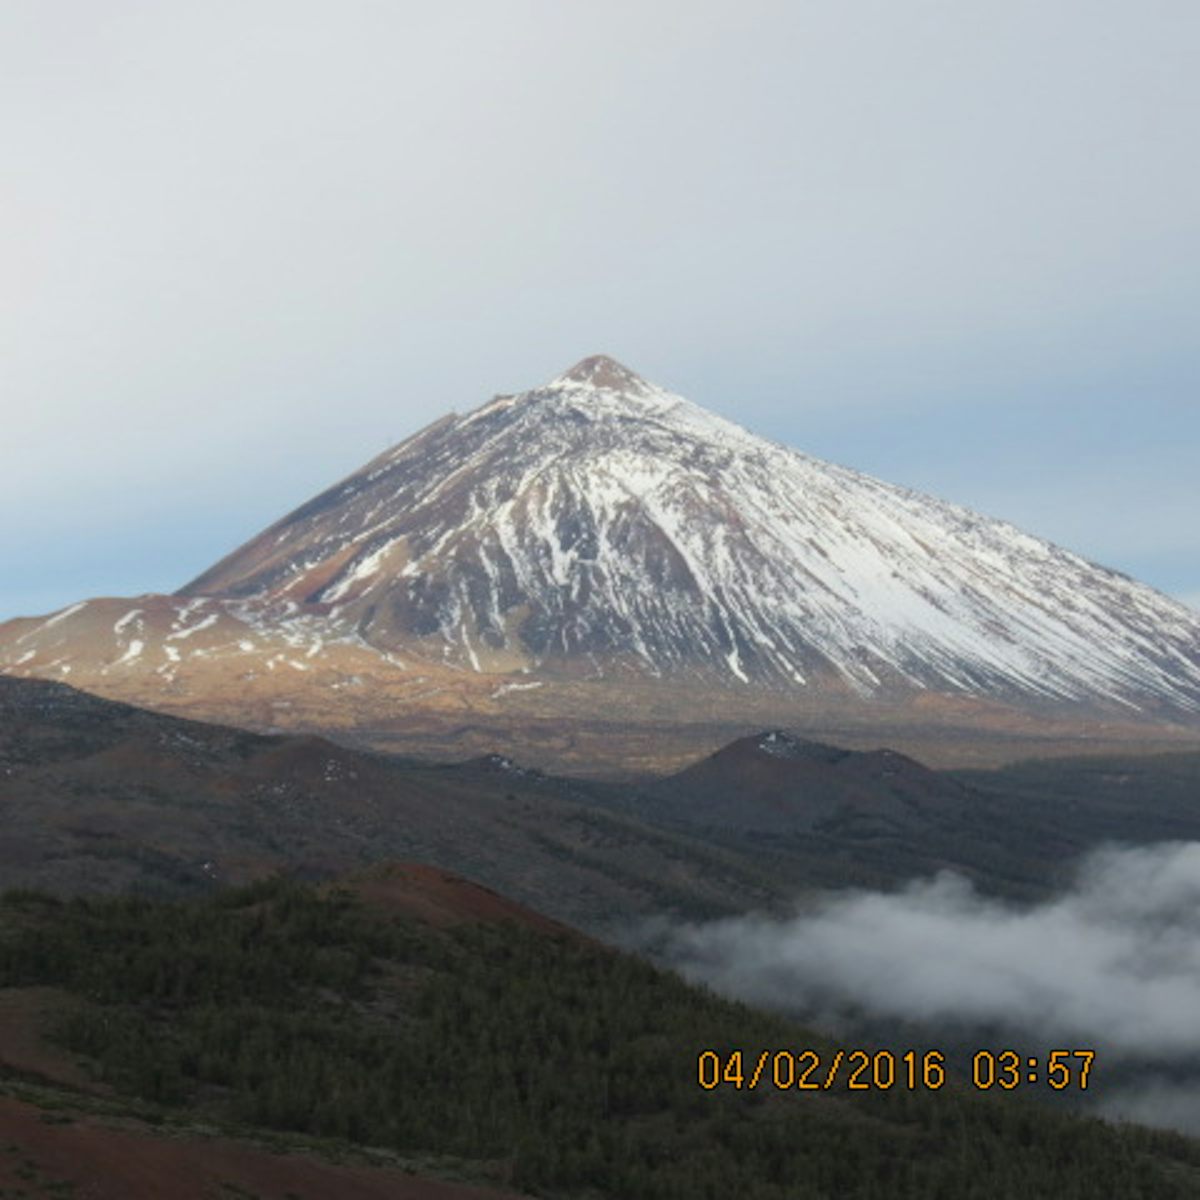 We were on the way to Mt Teide on Tenerife.